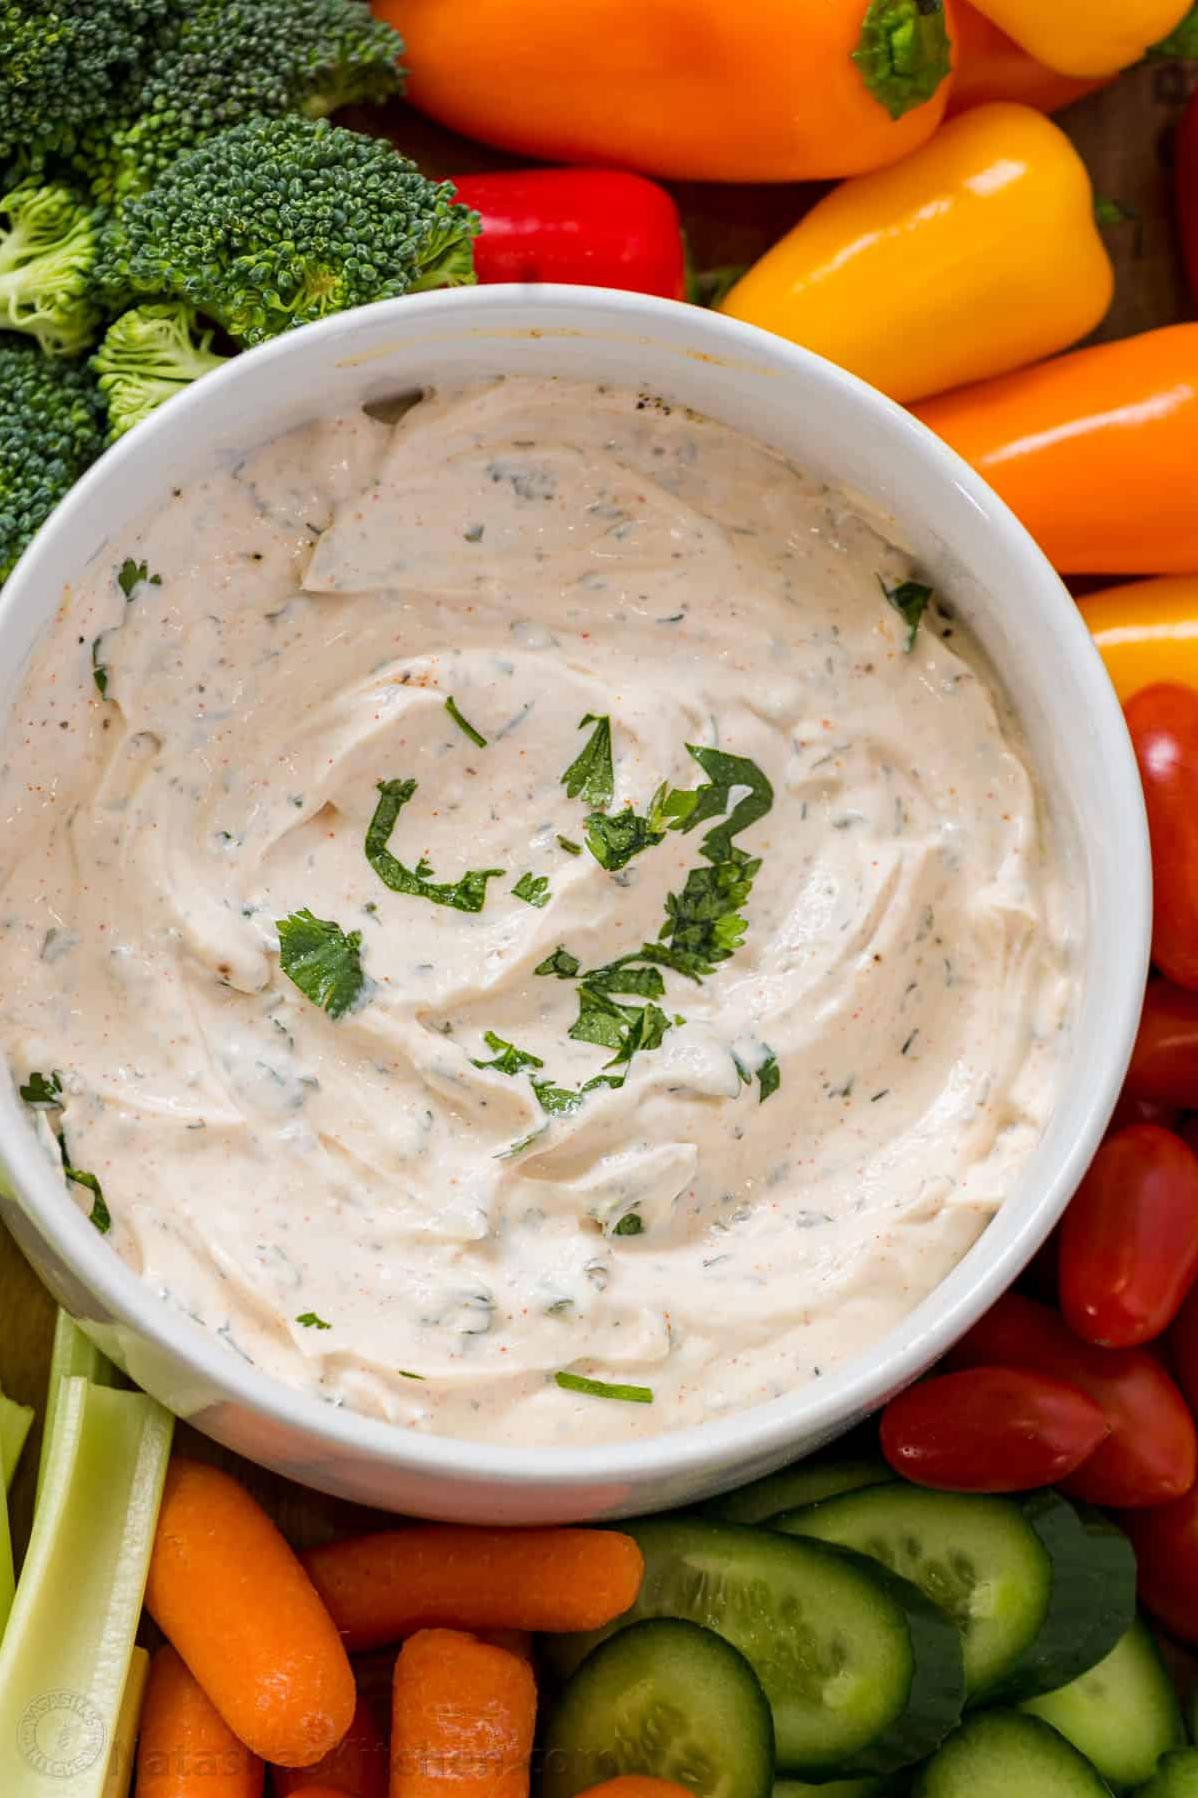  You won't believe this dip is dairy-free!